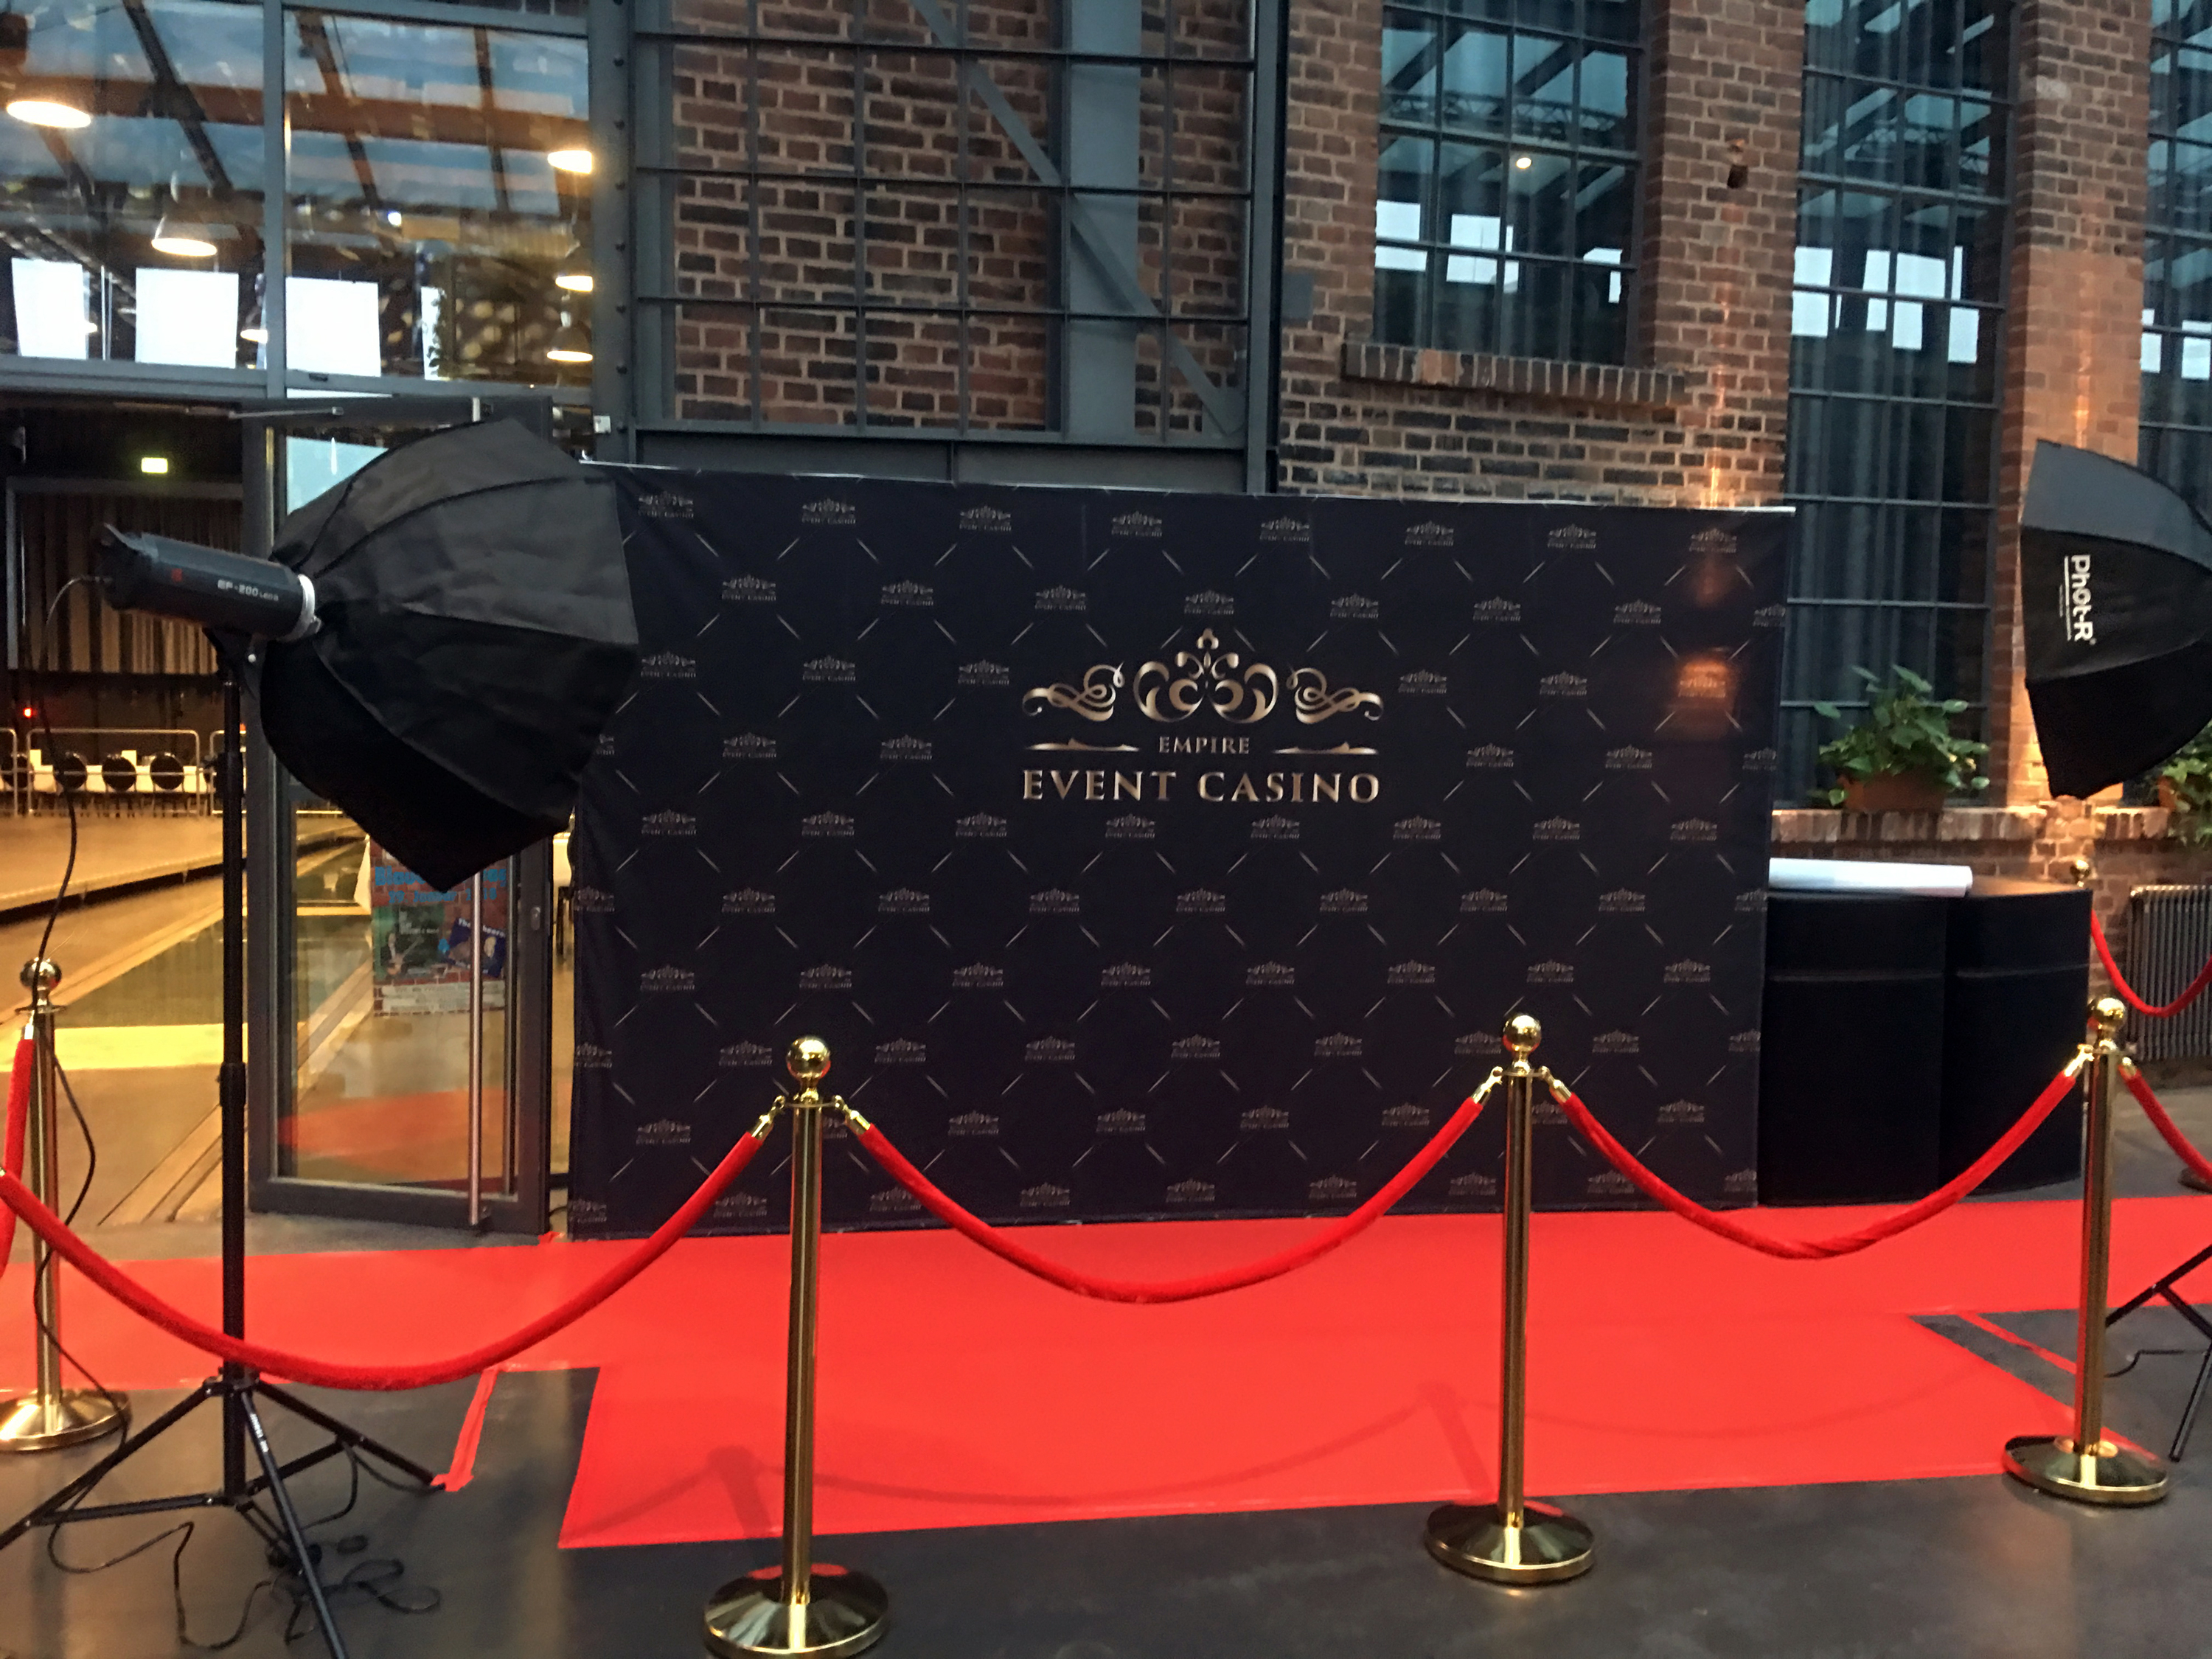 Red Carpet Empfang